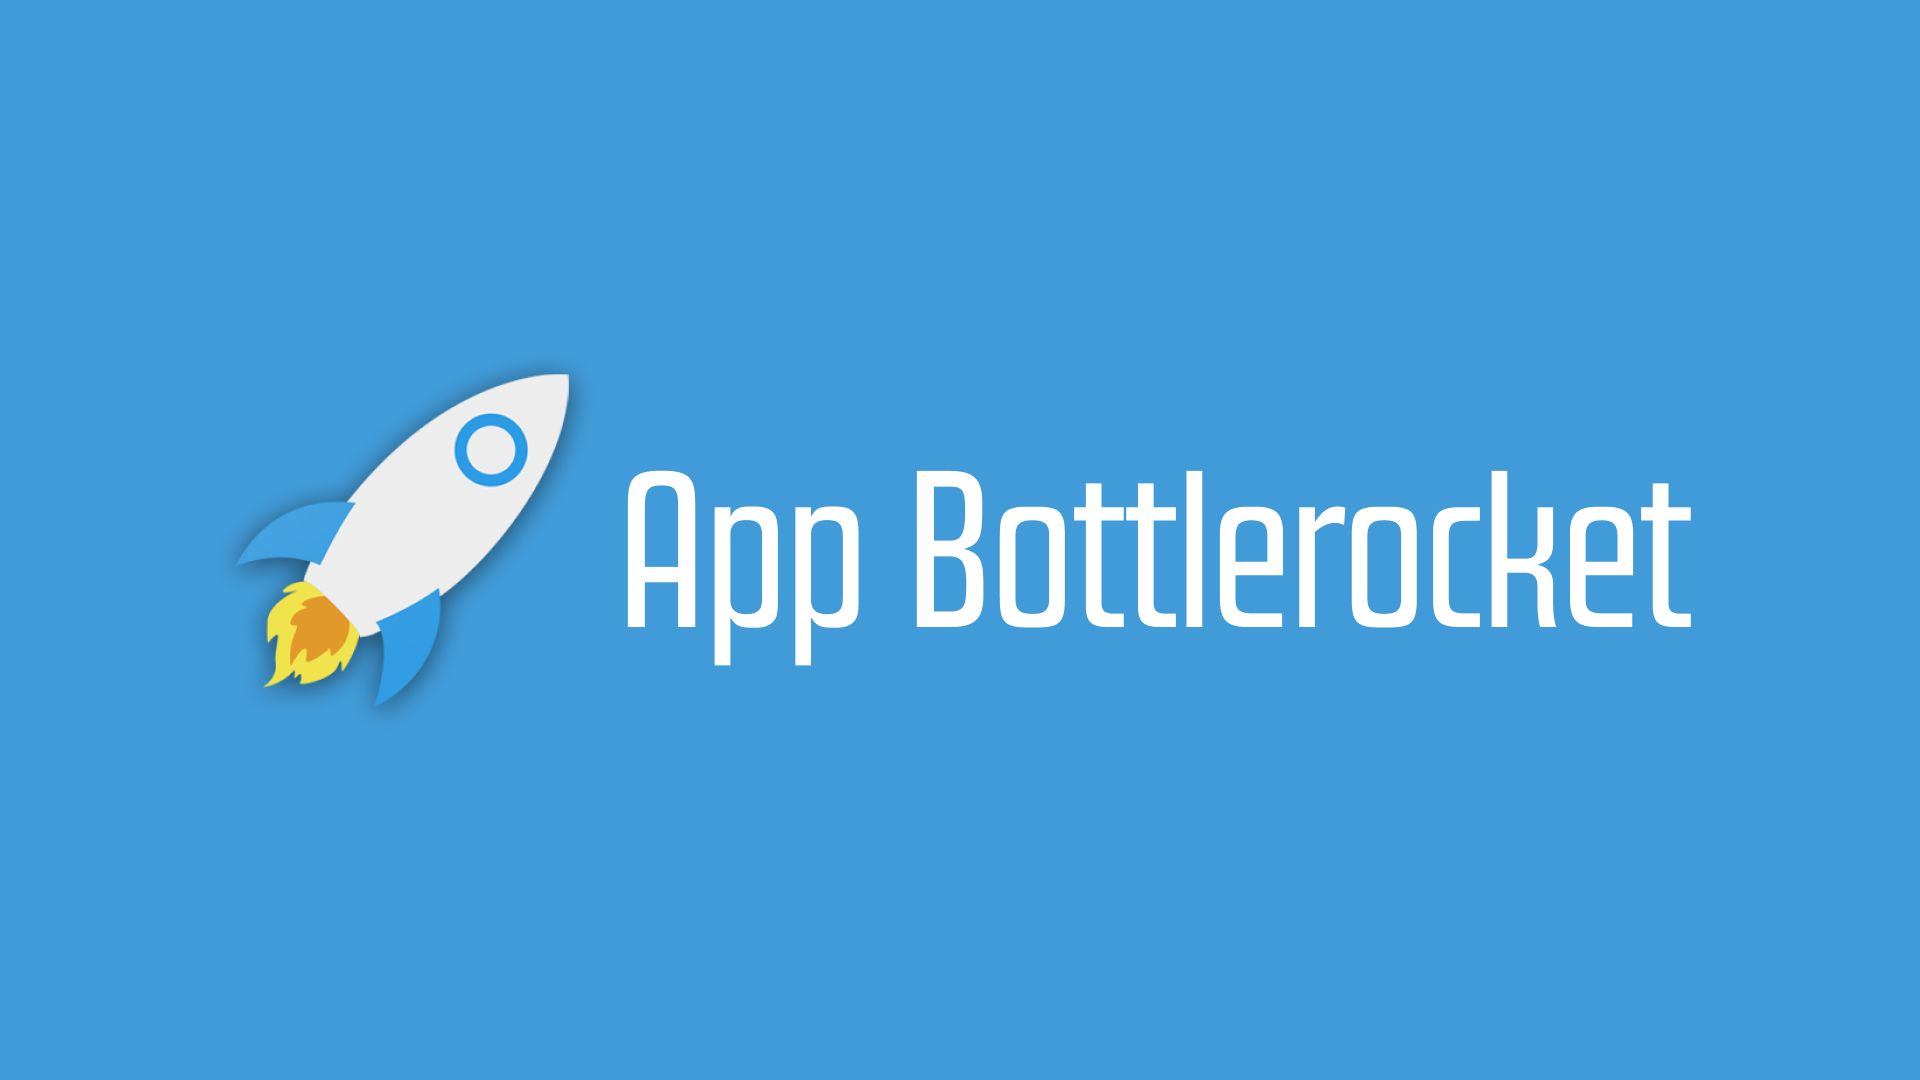 App Bottlerocket: Search the App Store from Anywhere